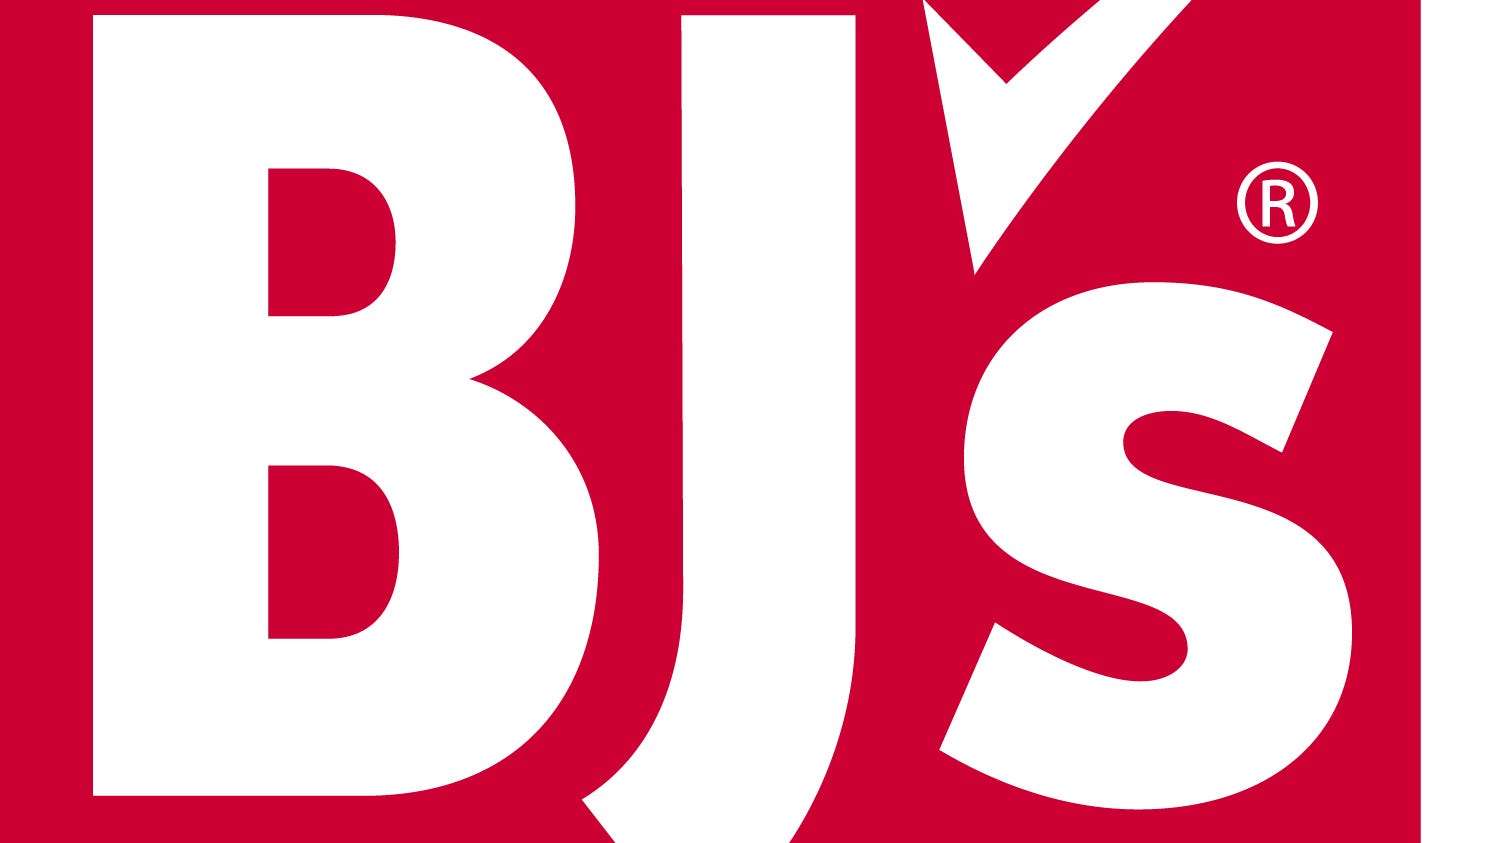 BJ's Wholesale Club - 3 Months Free Trial - wide 8